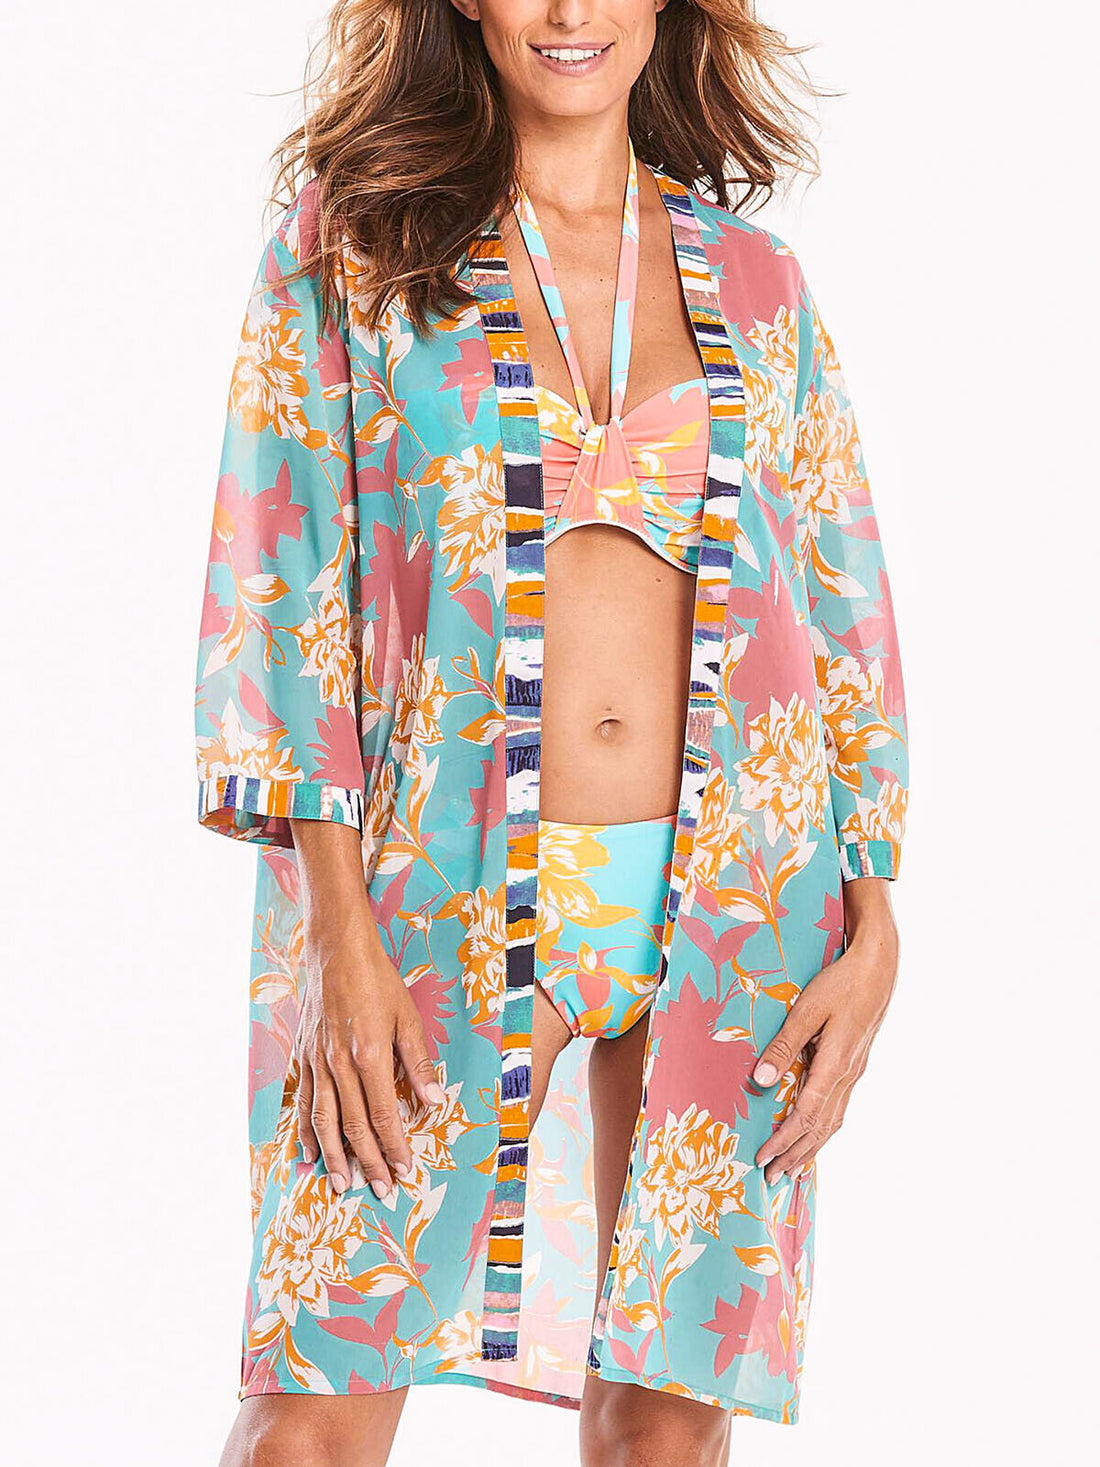 Simply Yours Turquoise Floral Open Front Kimono 16/18 20/22 24/26 28/30 32/34